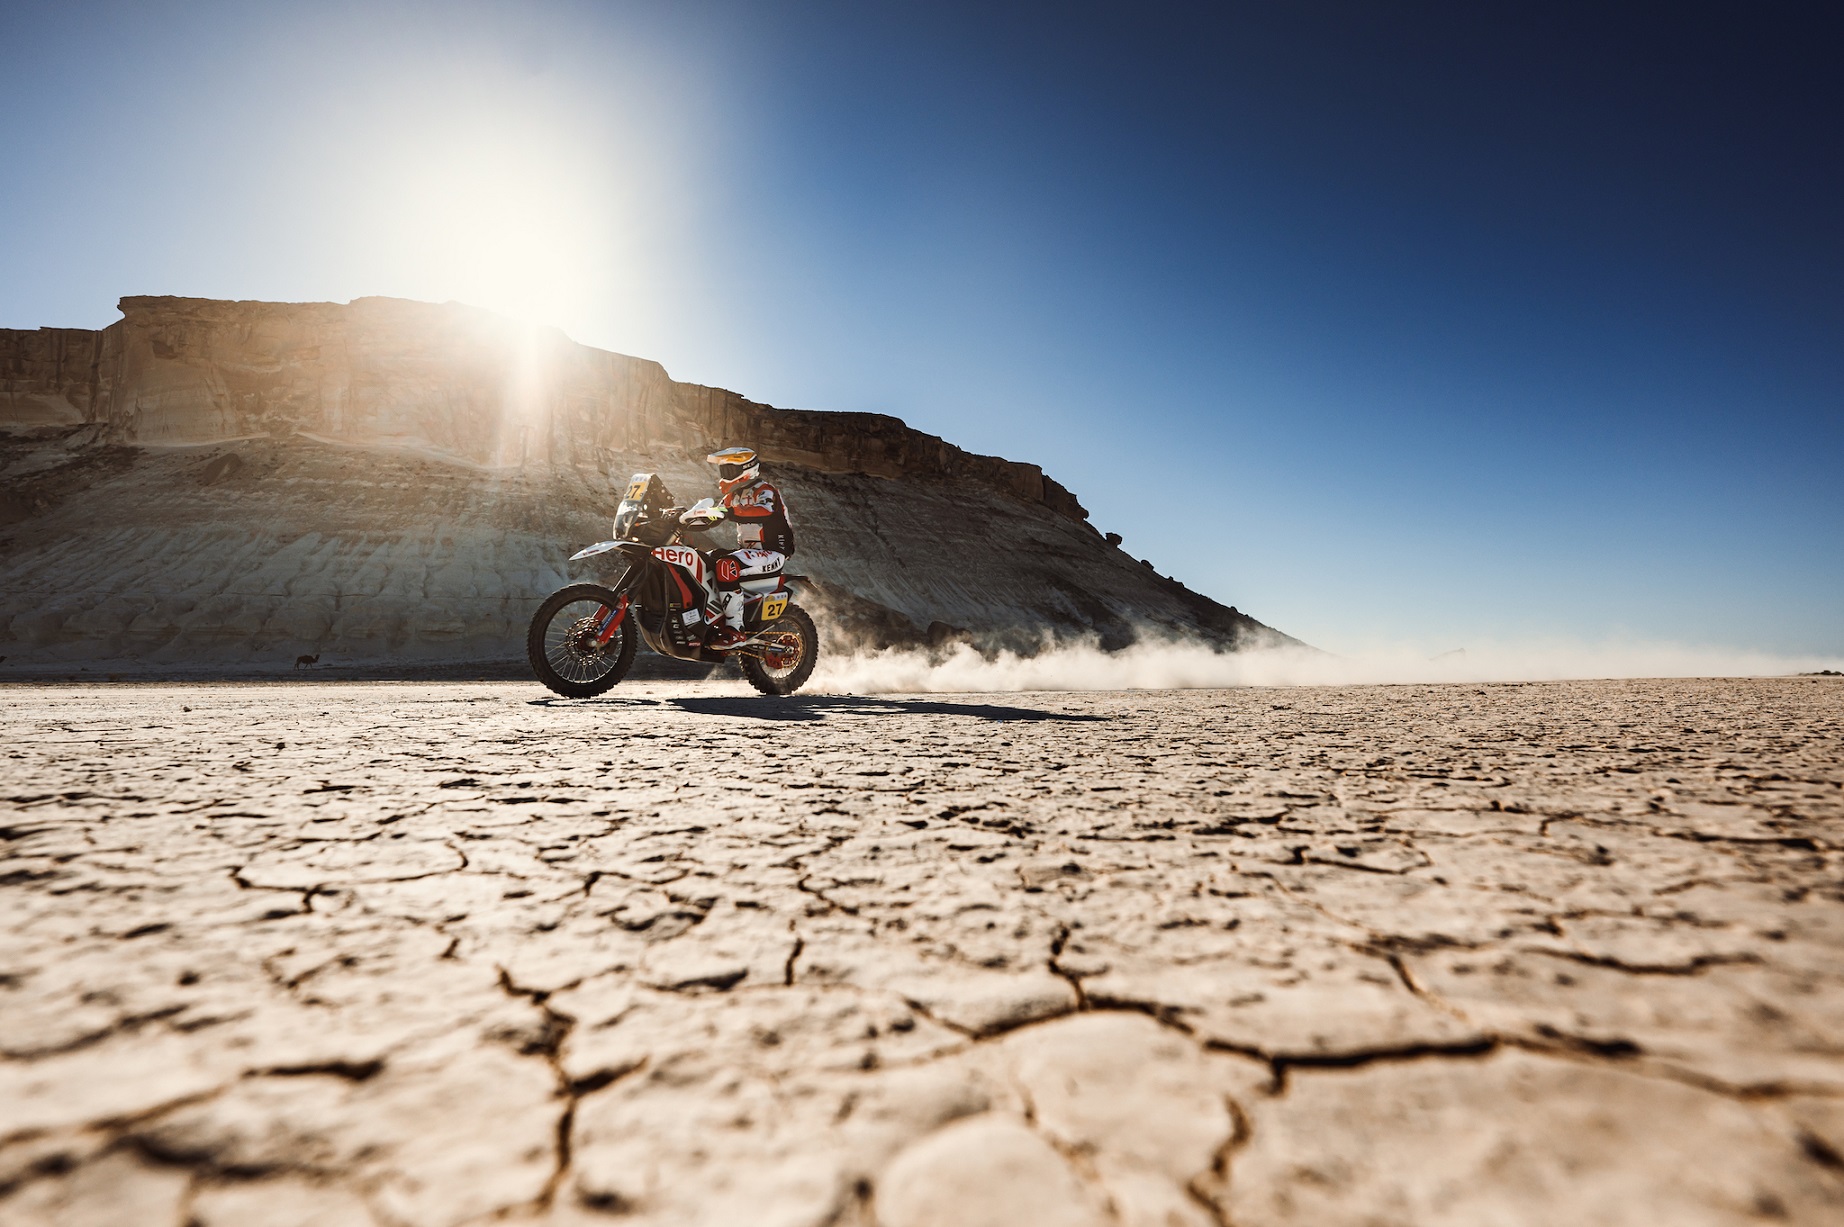 Hero Motosports team rally delivers a steady performance in stage 1 of rally Kazakhstan